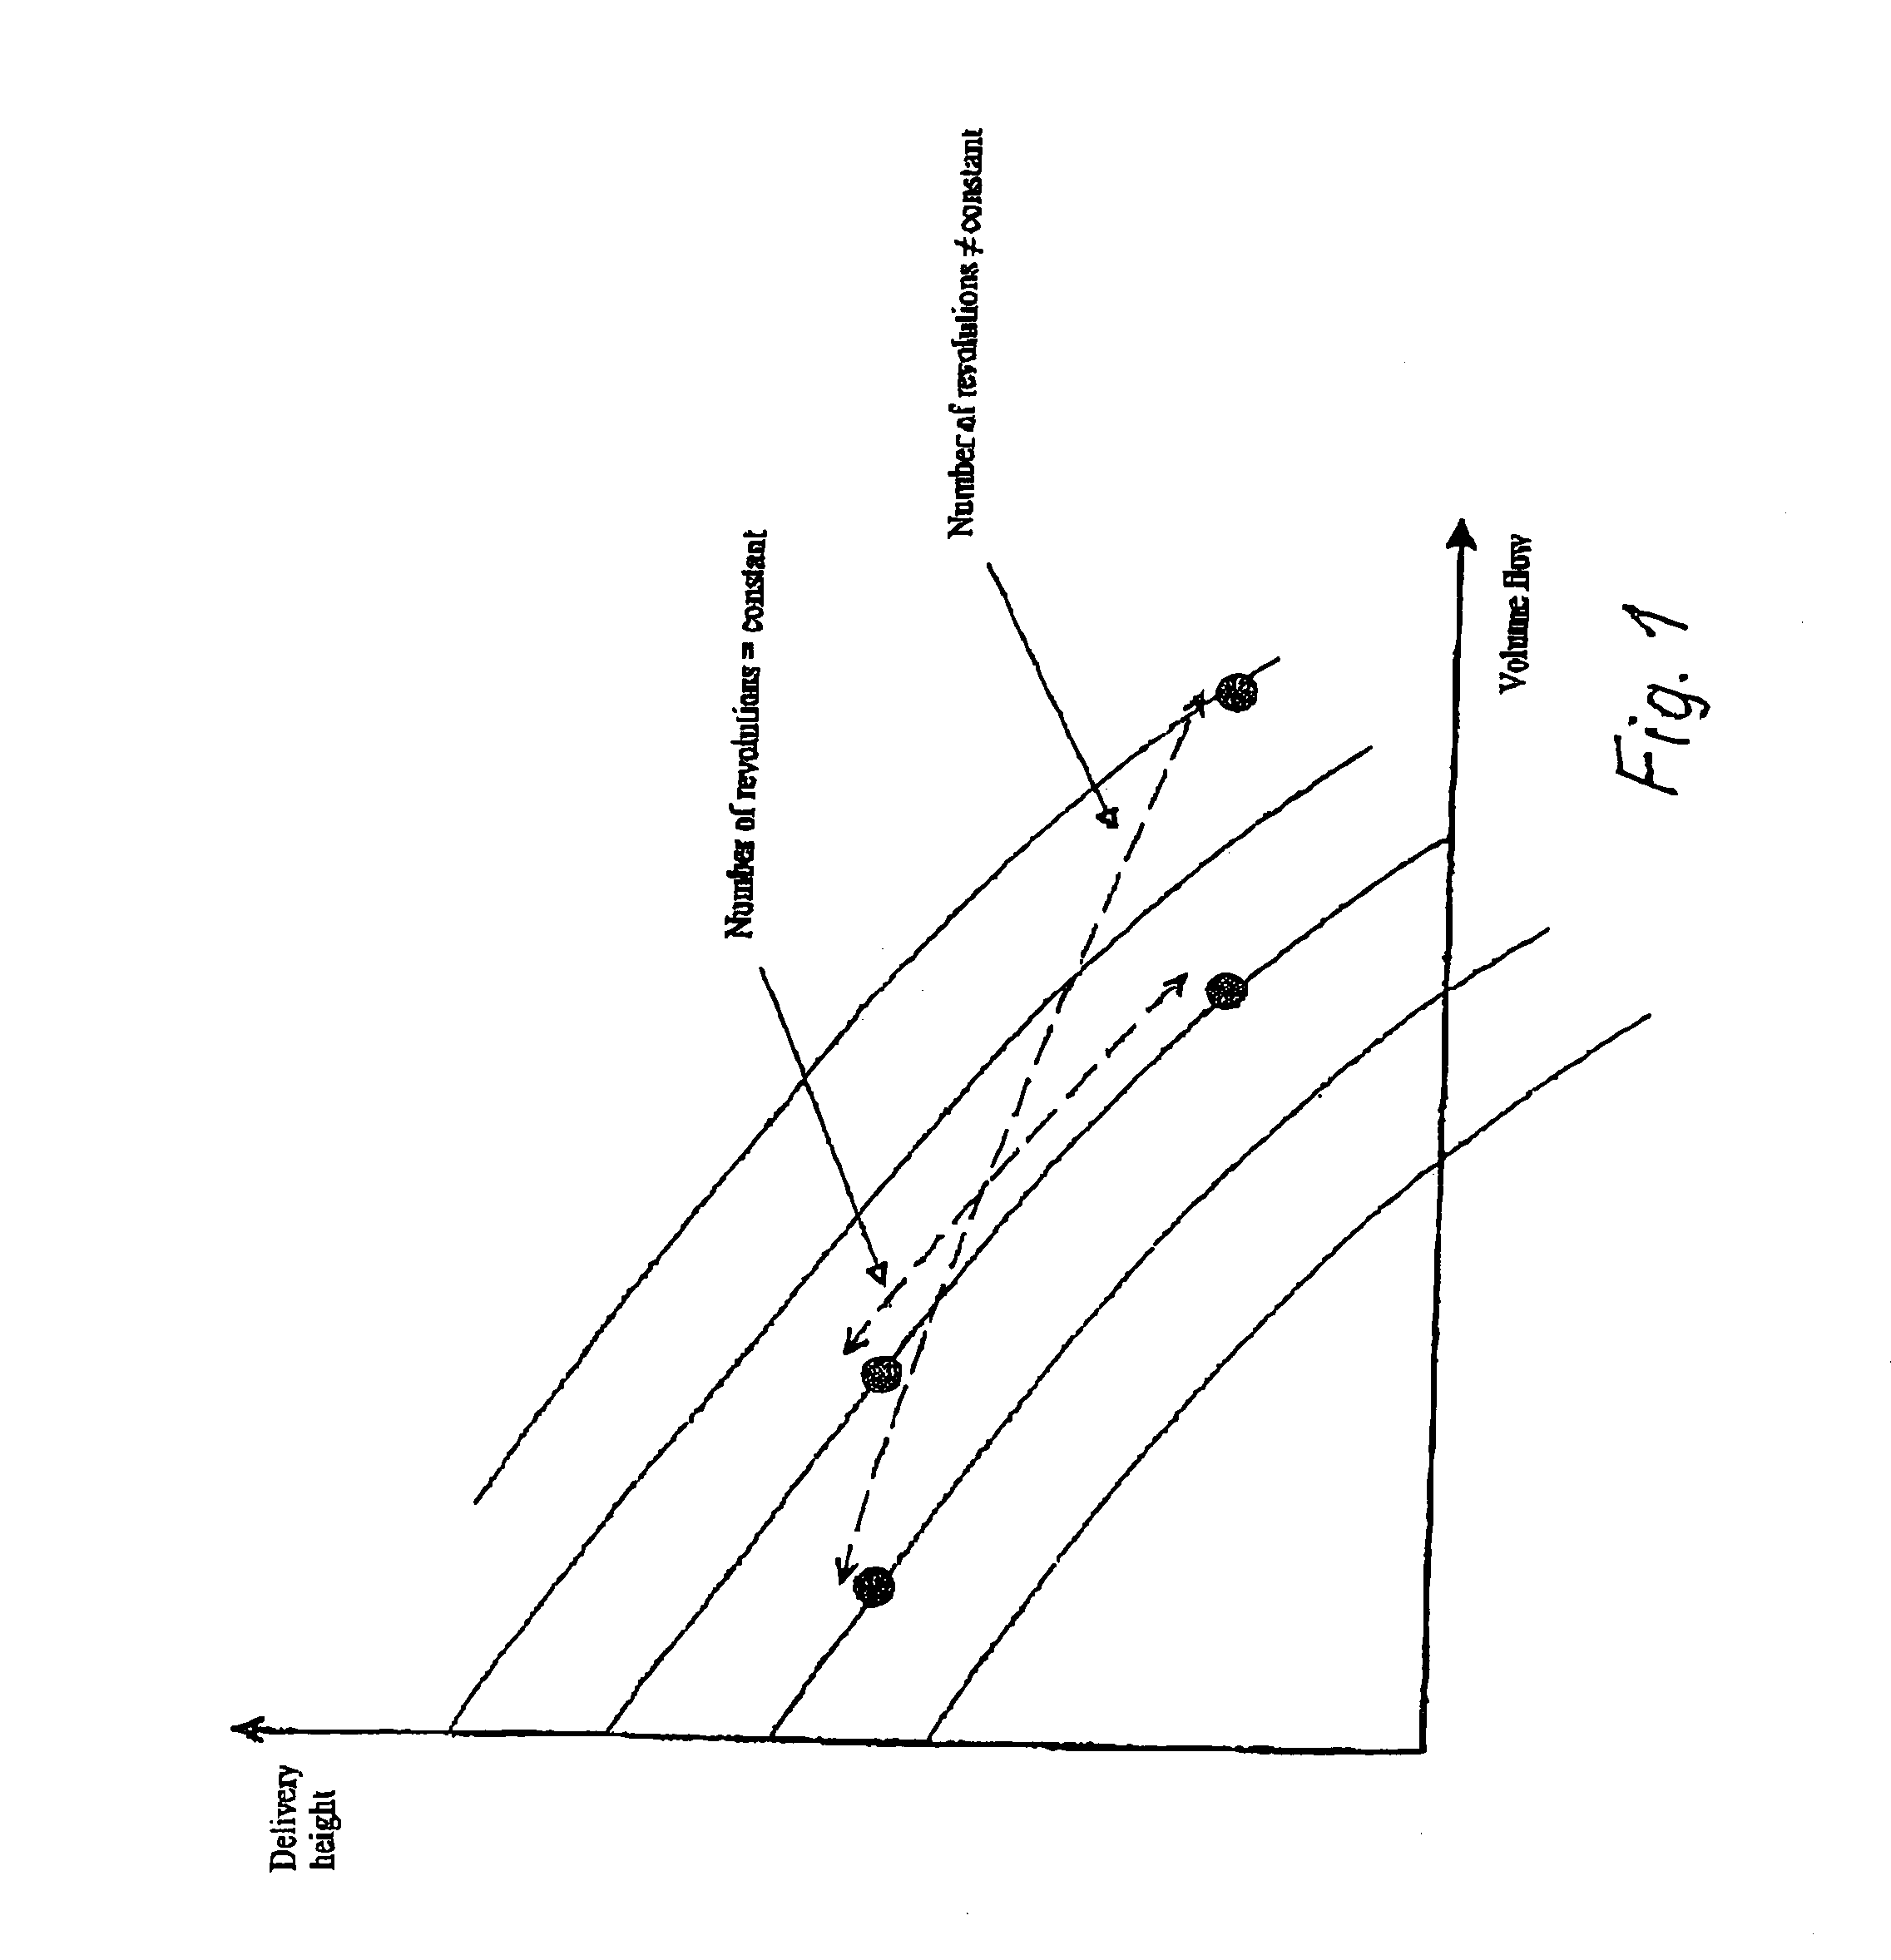 Method for controlling an assist pump for fluid delivery systems with pulsatile pressure